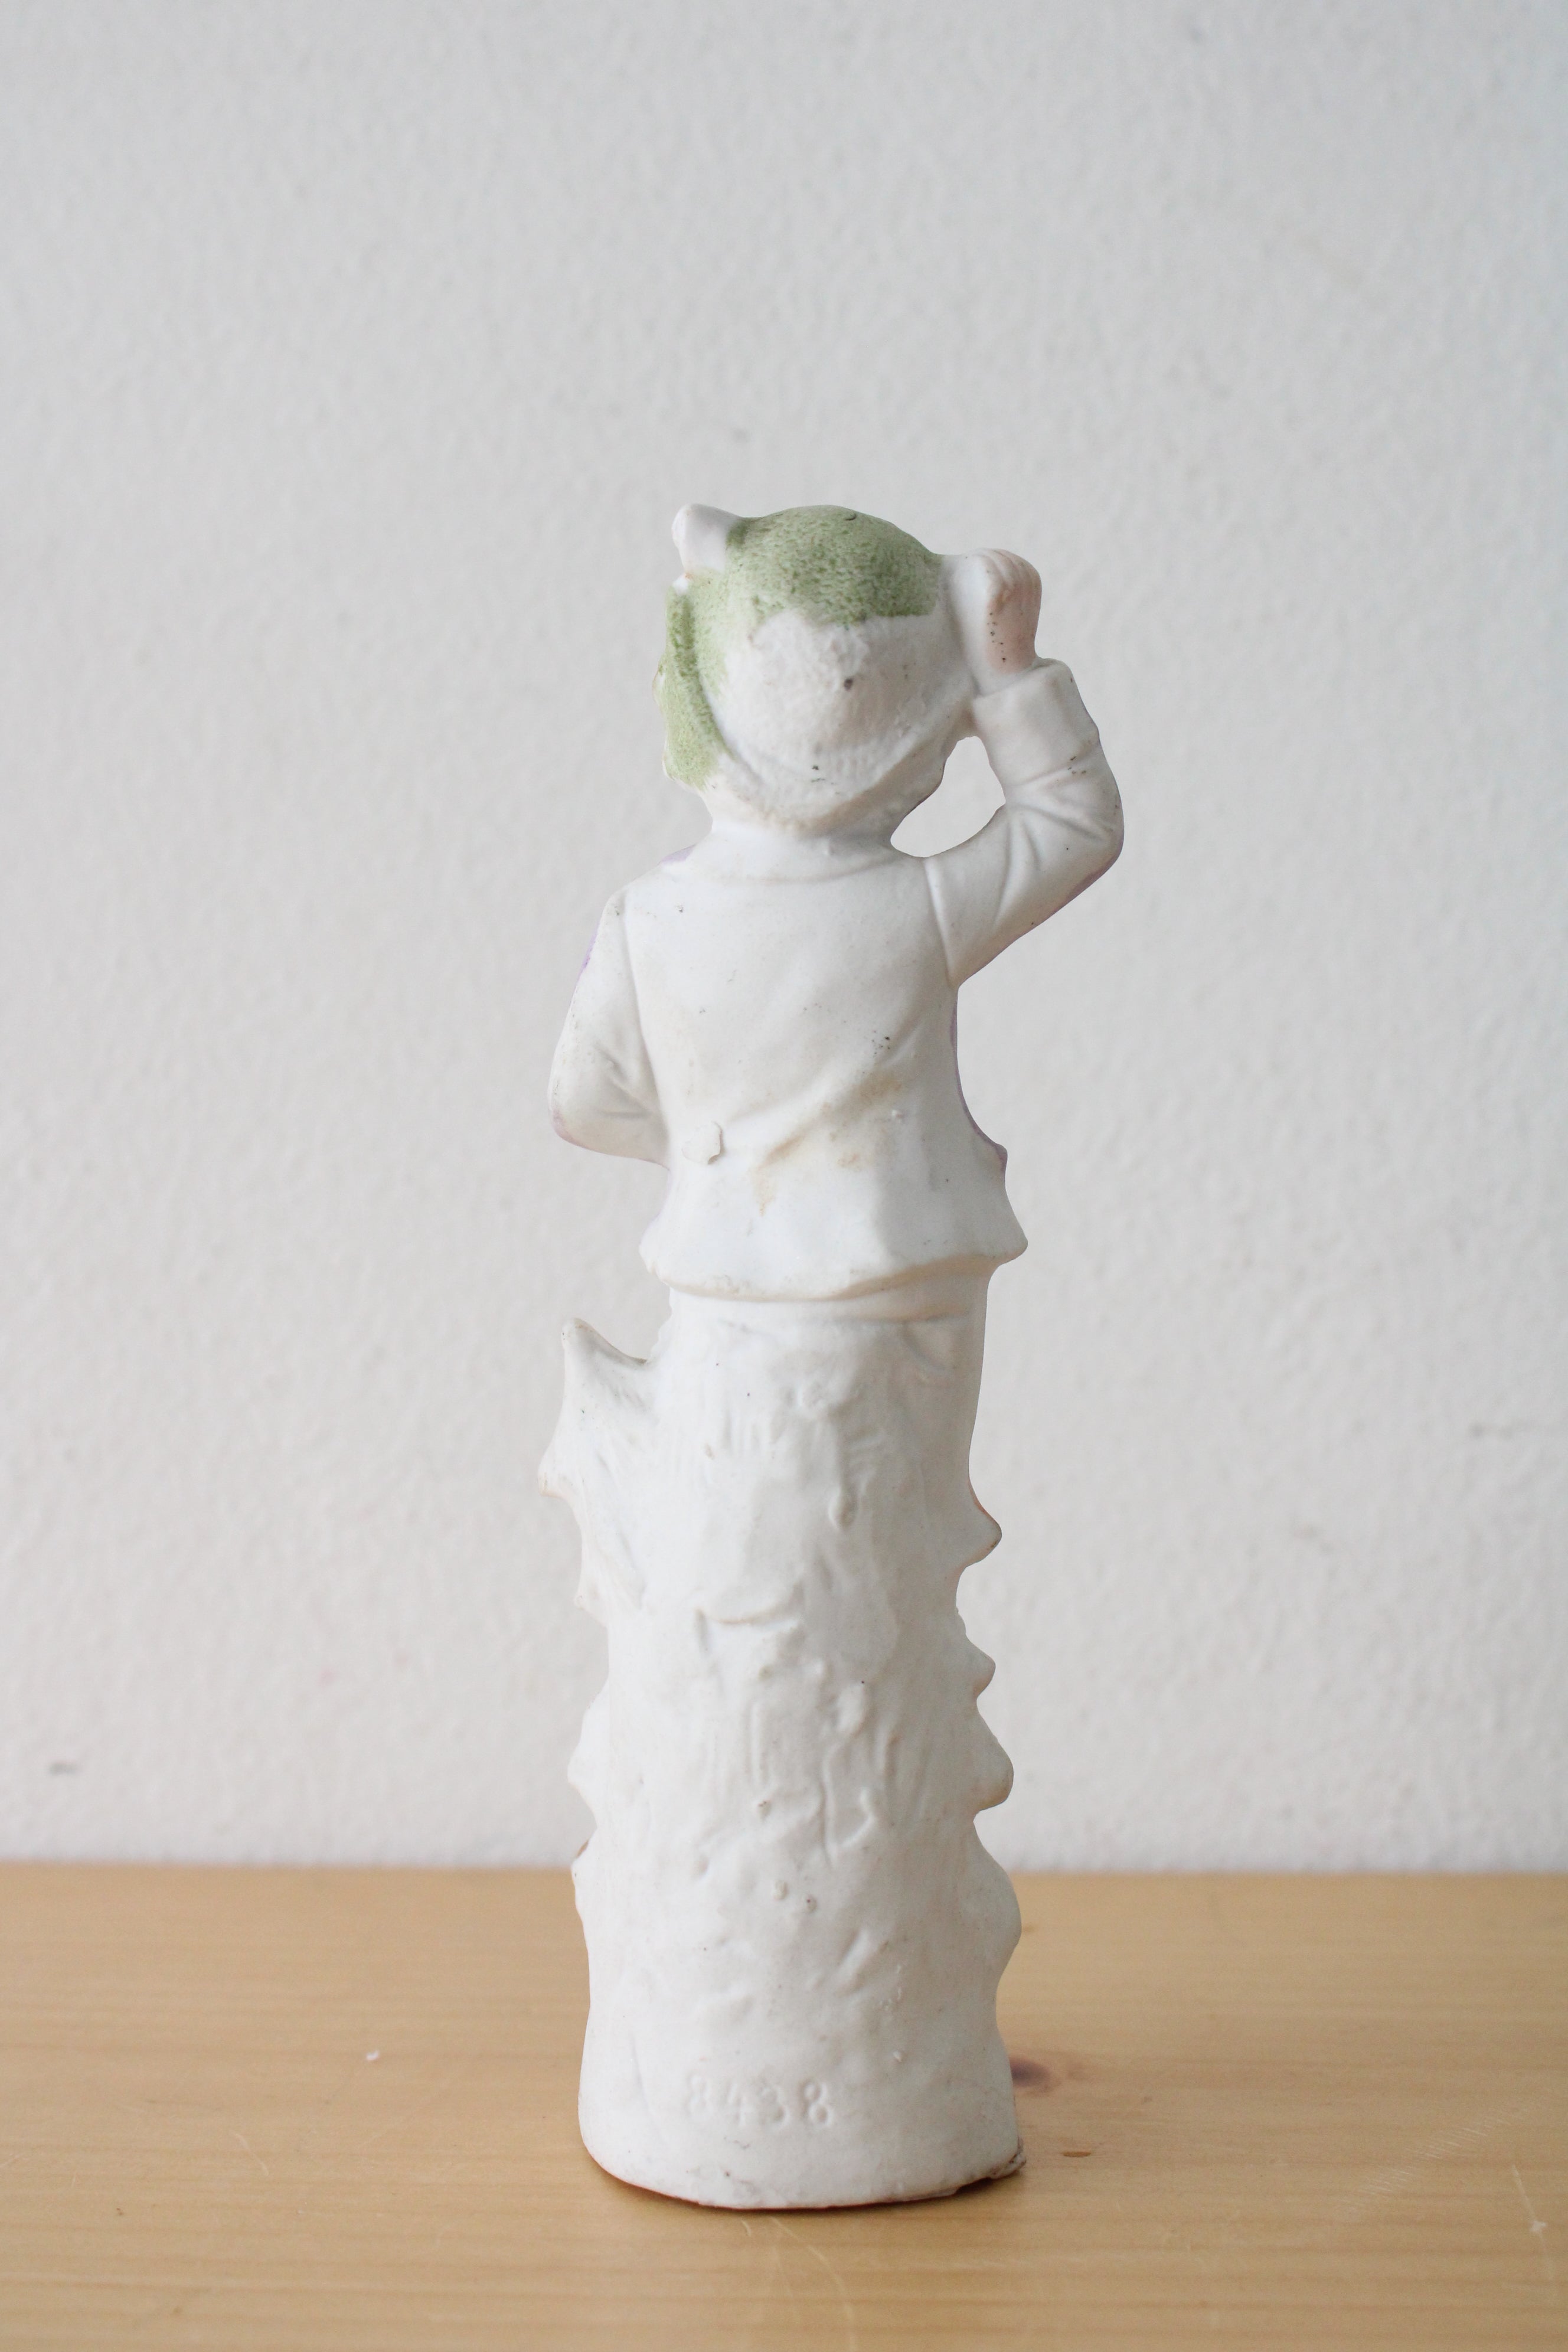 Porcelain Painted Ball Throwing Boy Figurine